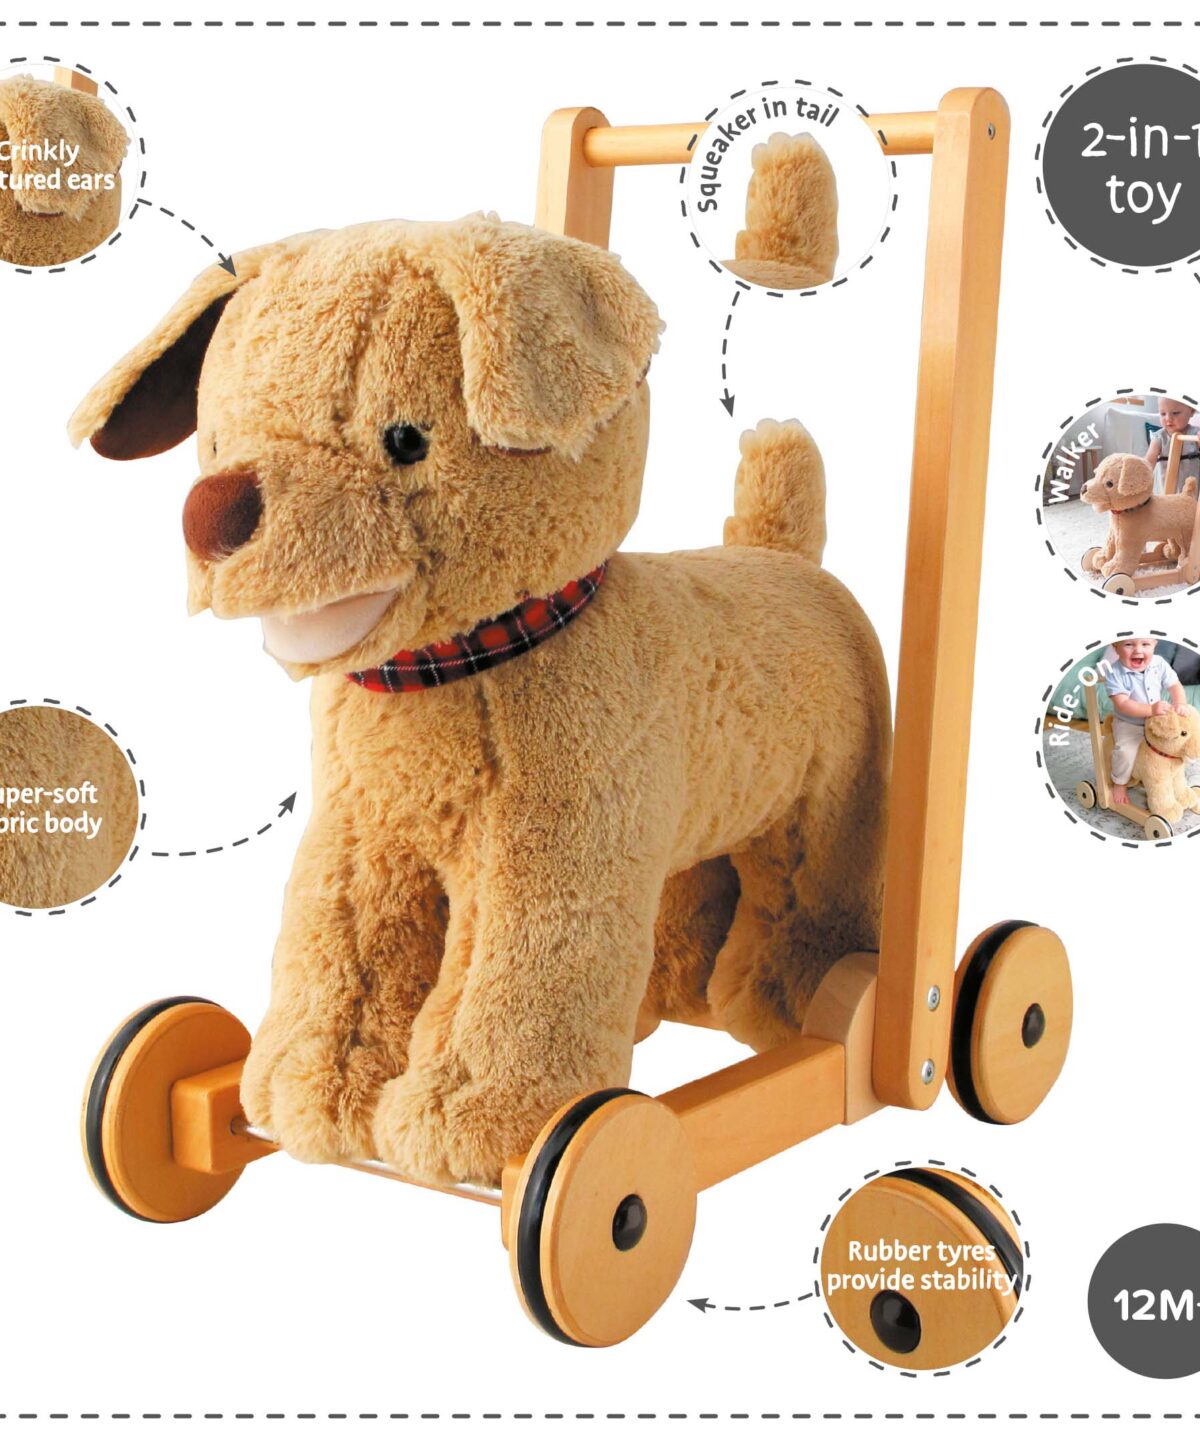 Features and benefits displayed for Dexter Dog Baby Walker